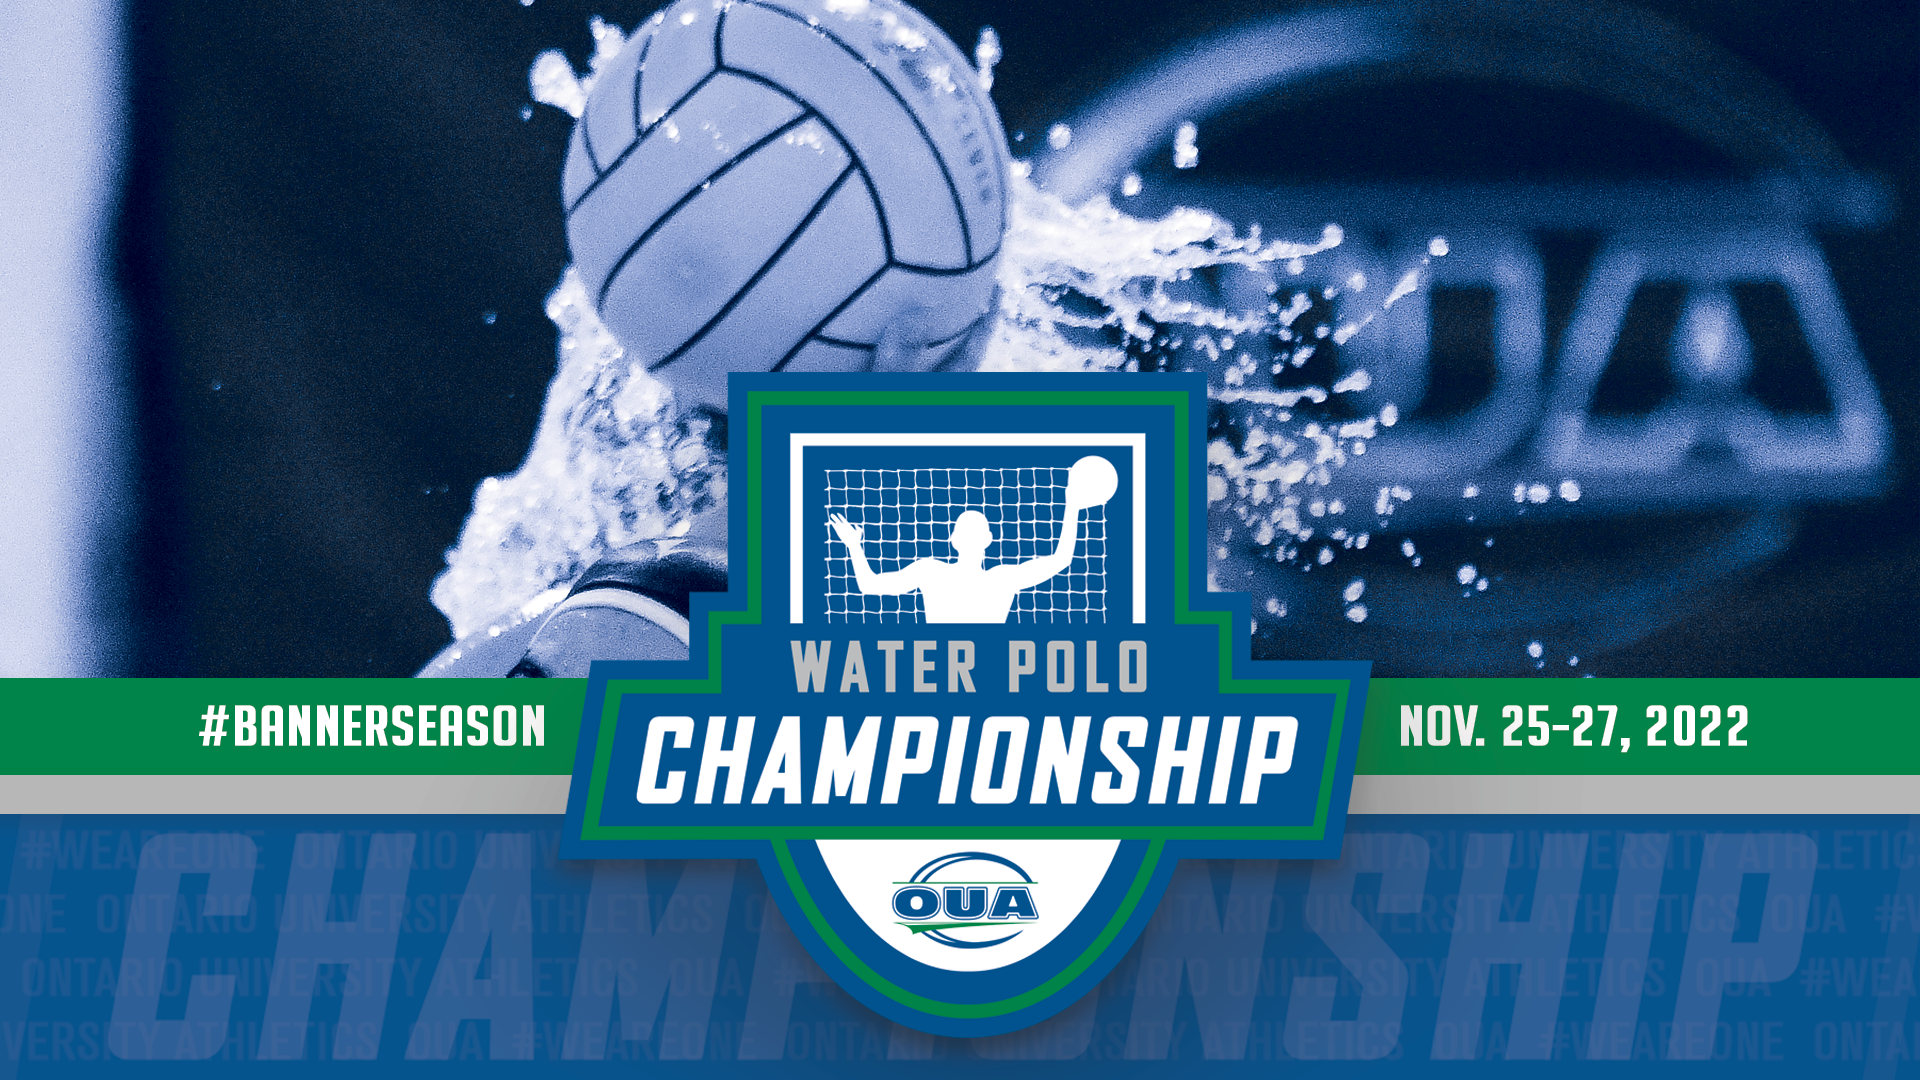 Banner Season: Fall championships wrap up with Blues eyeing sixth straight water polo title